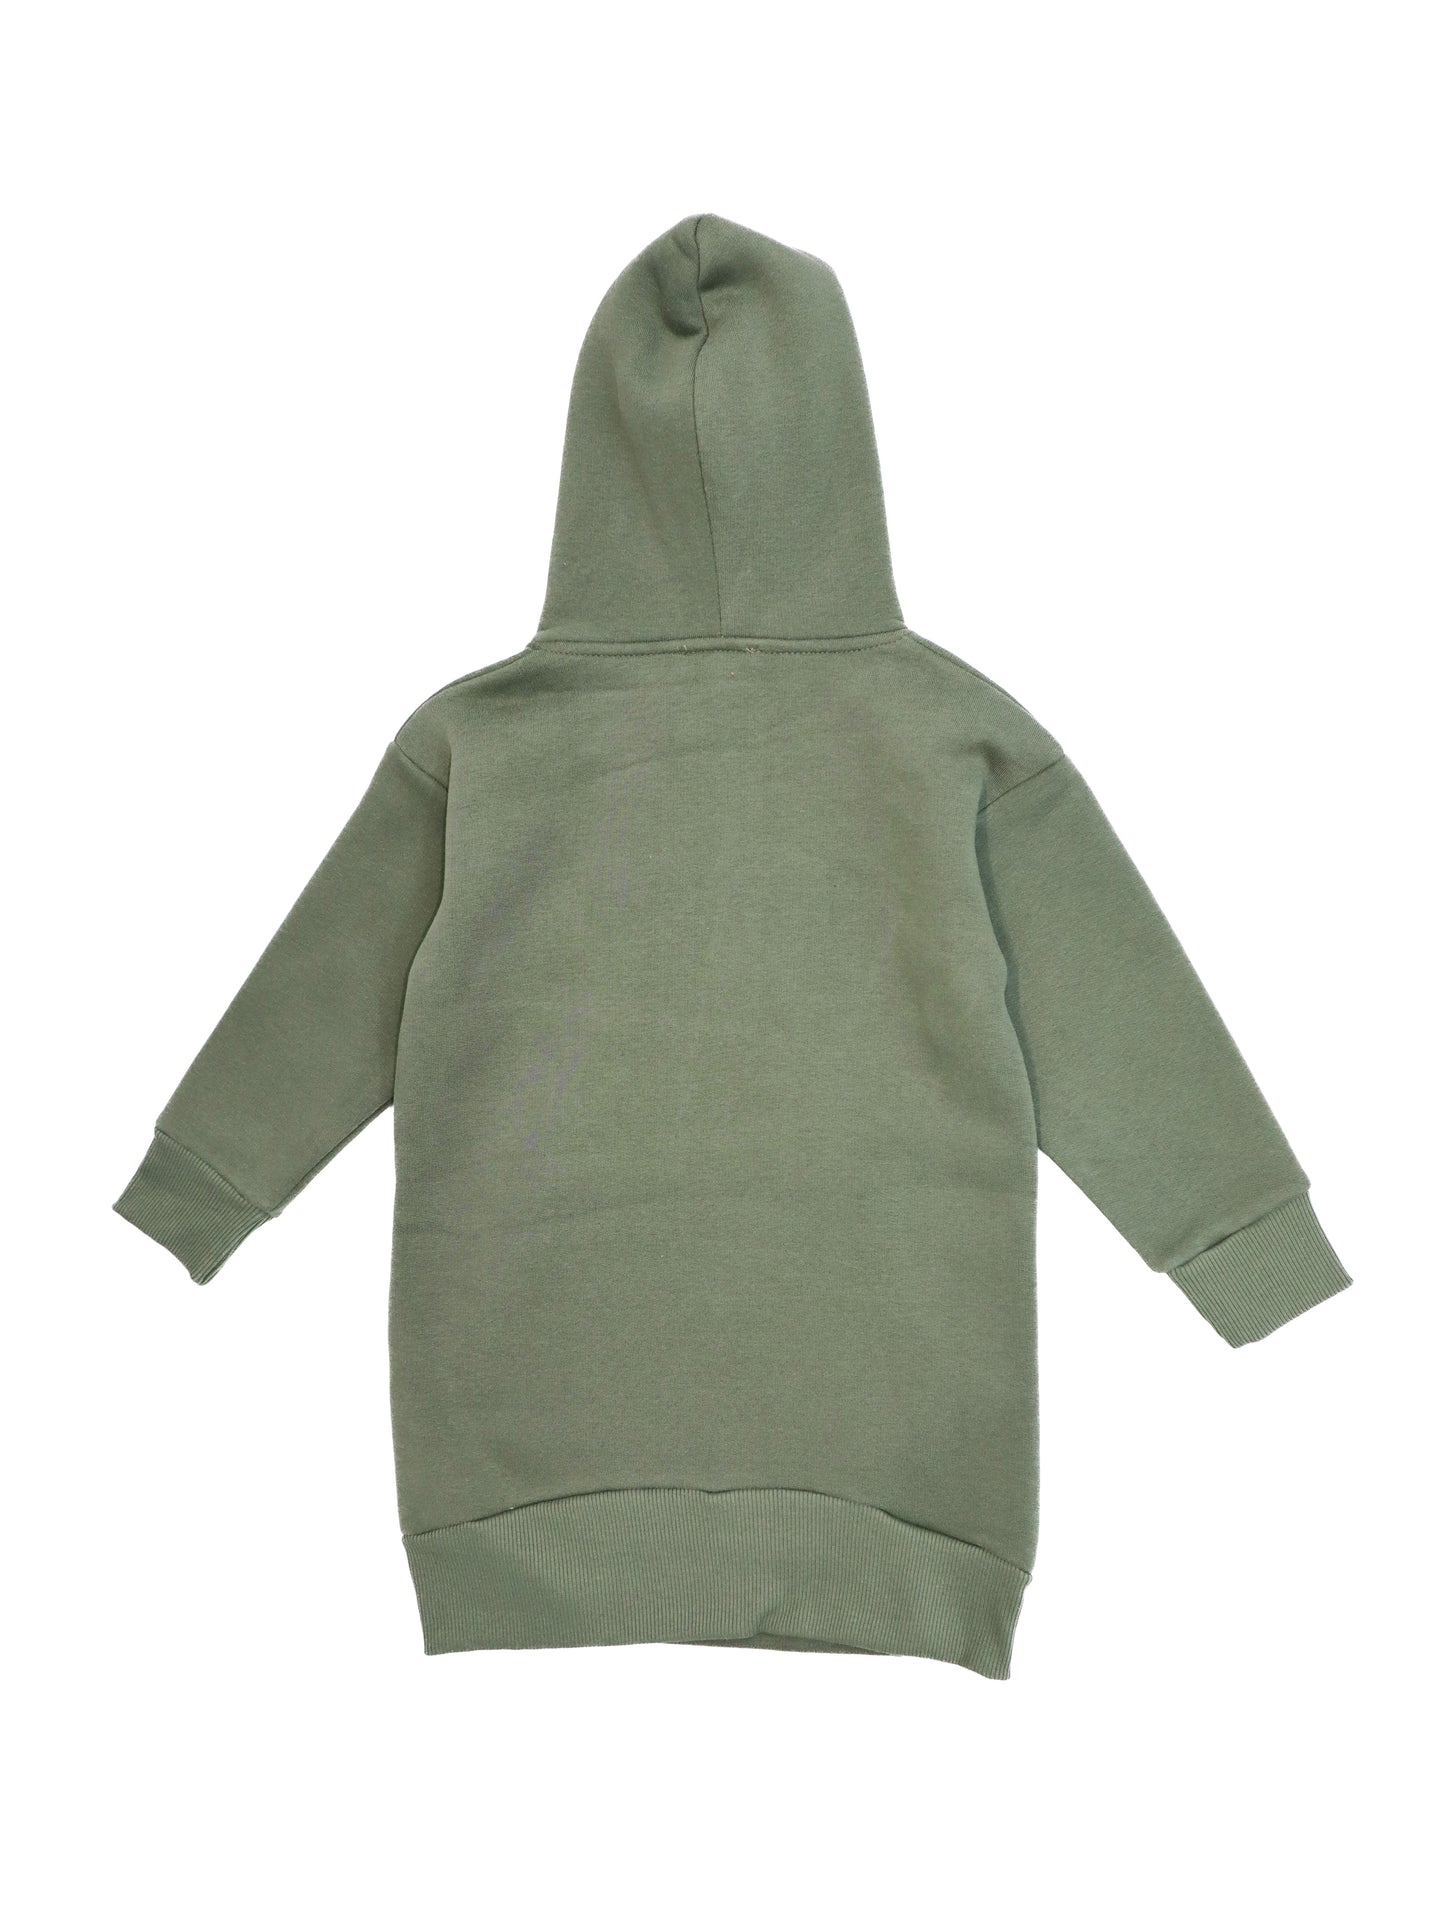 Children's Hooded Sweat Dress with Embossed Print Detail